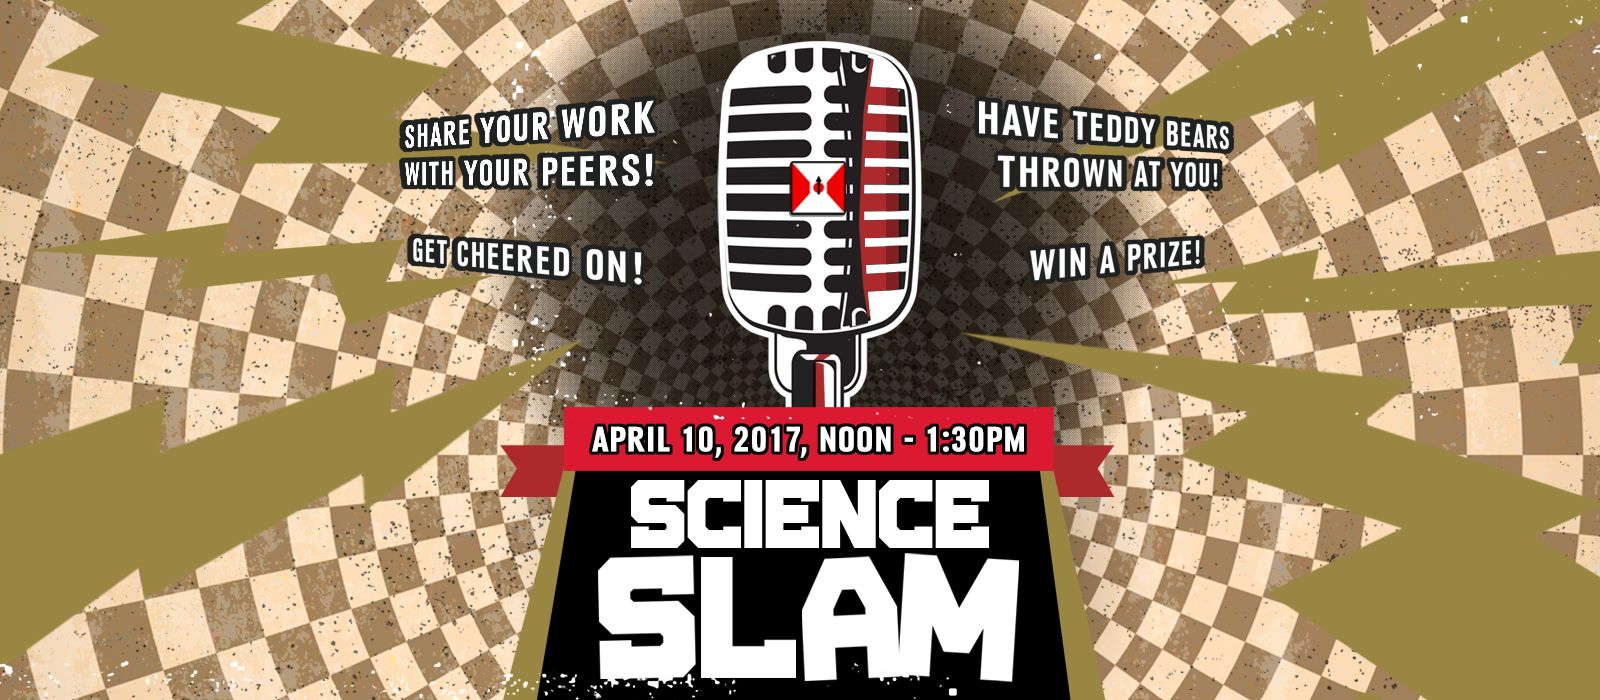 Second annual Science Slam is April 10